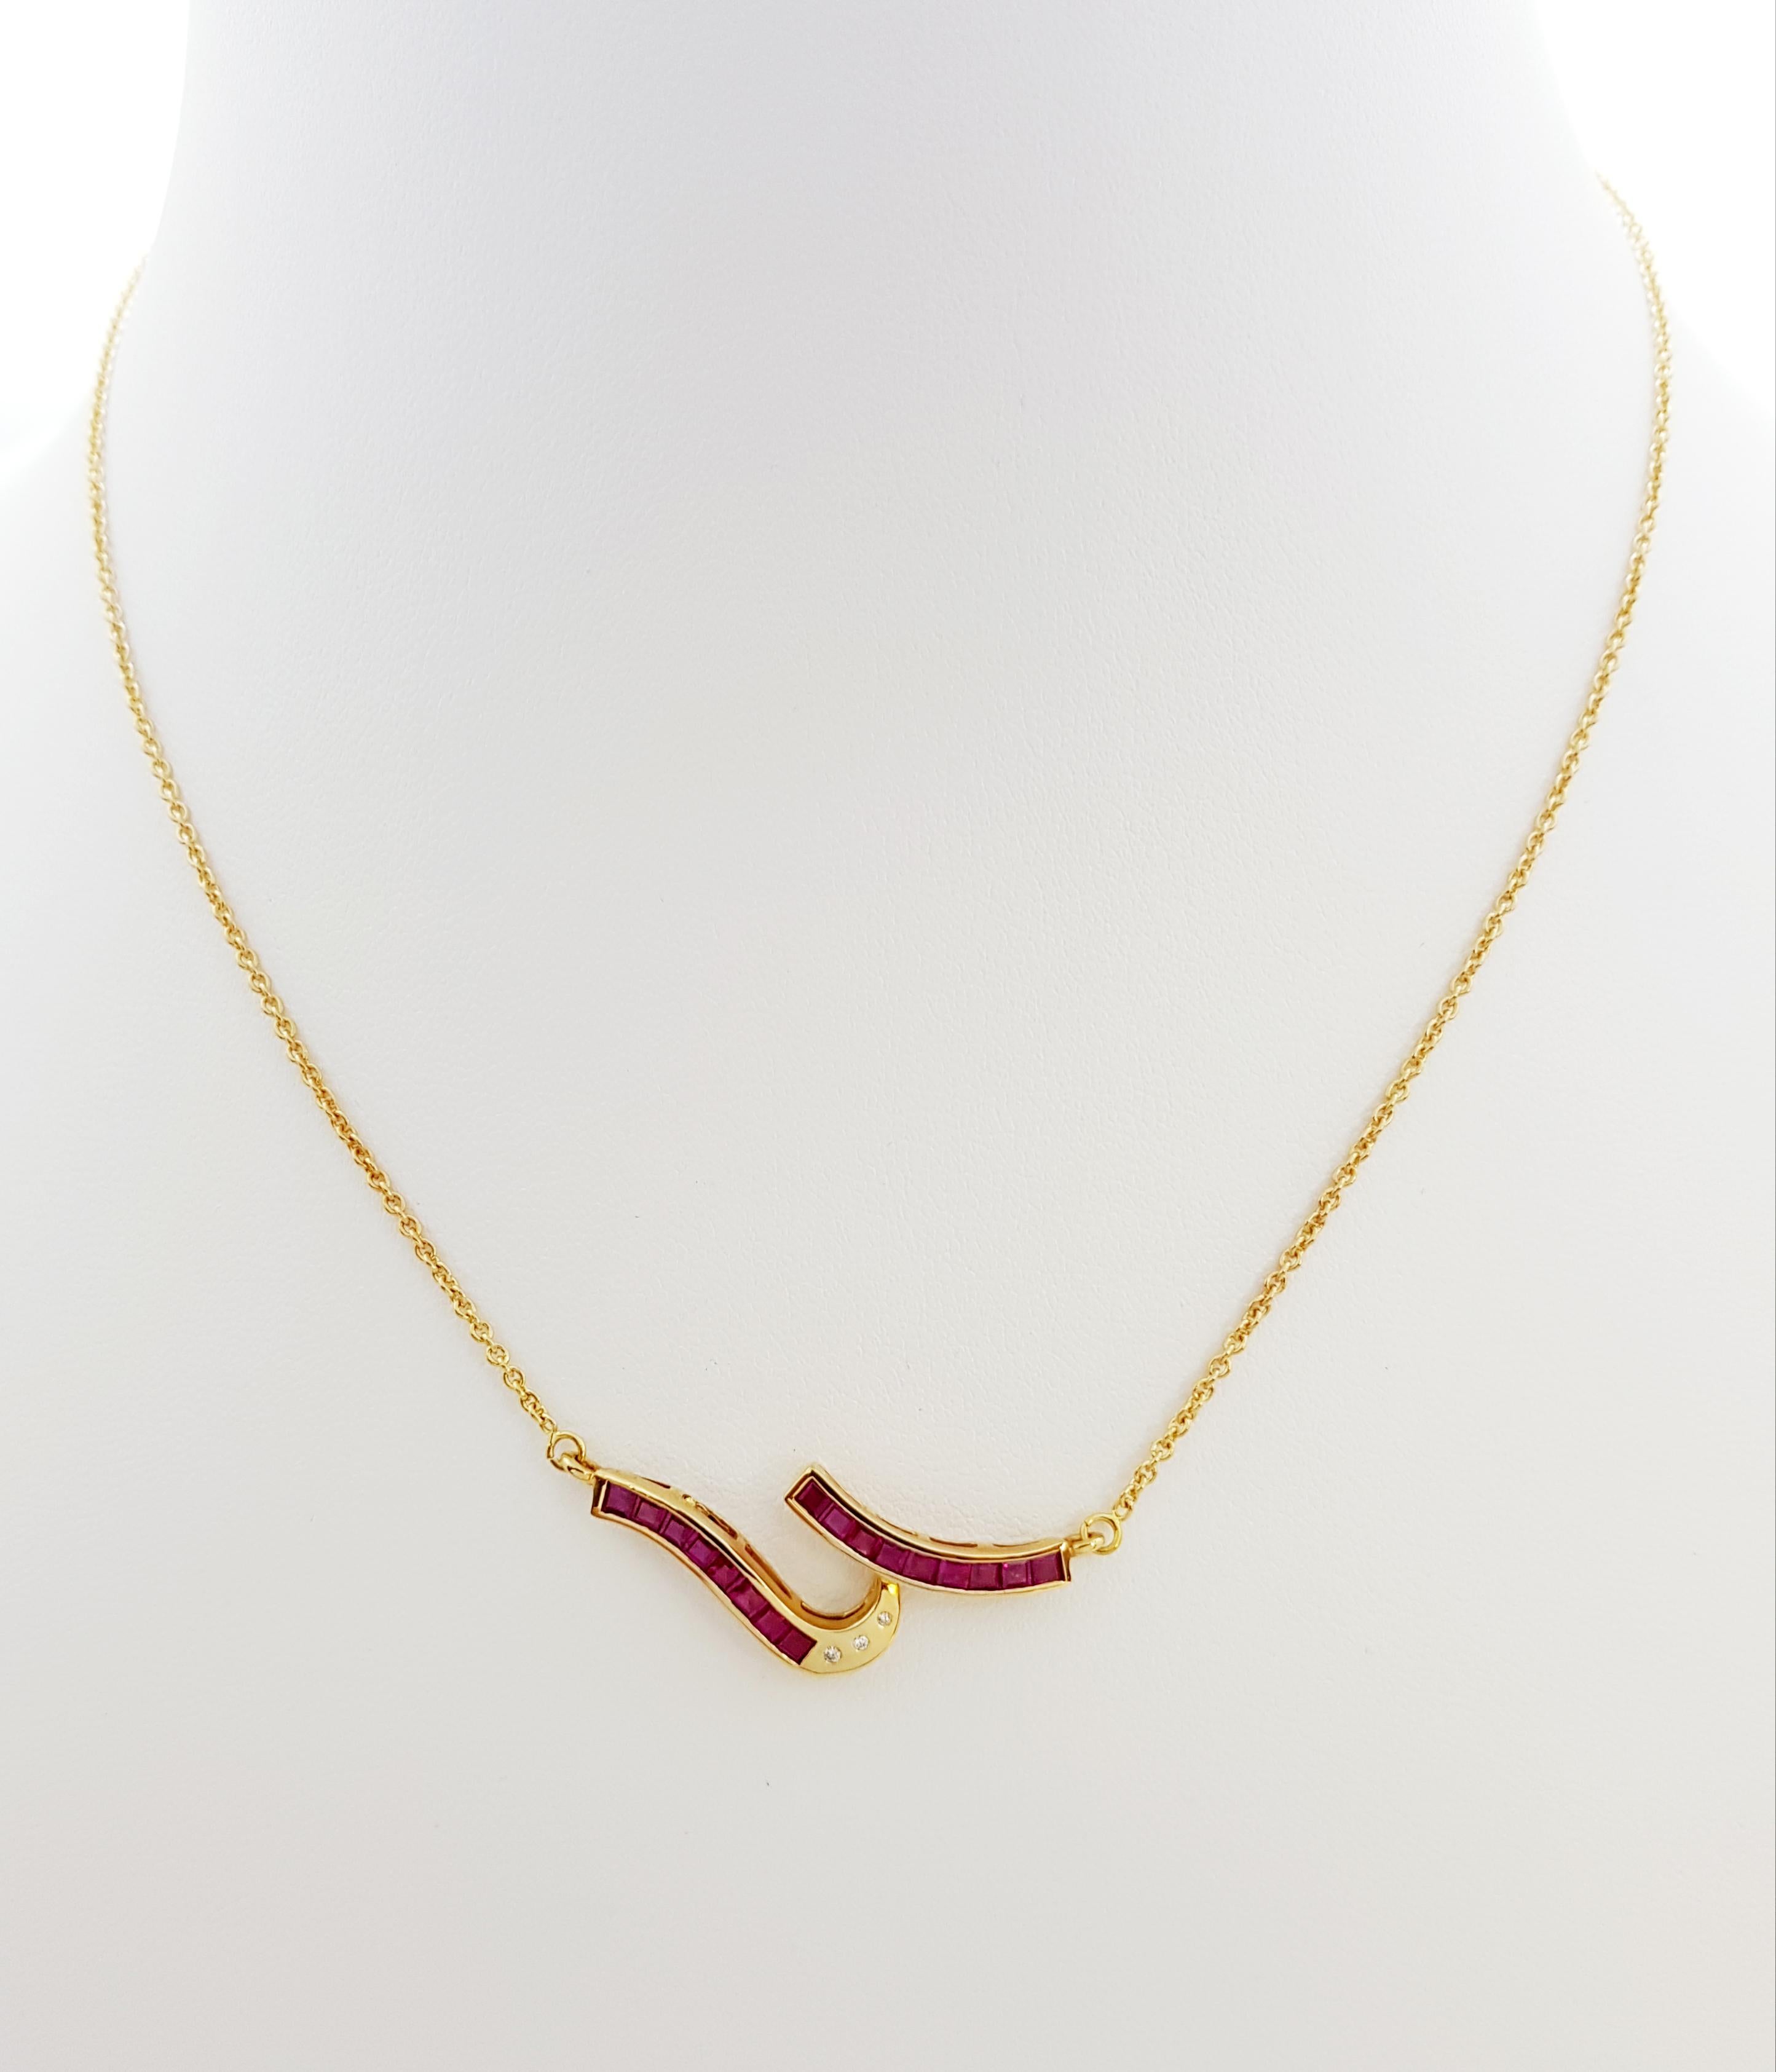 Ruby 1.21 carats with Diamond 0.02 carat Necklace set in 18 Karat Gold Settings

Width: 1.4 cm 
Length: 44.0 cm
Total Weight: 6.47 grams

